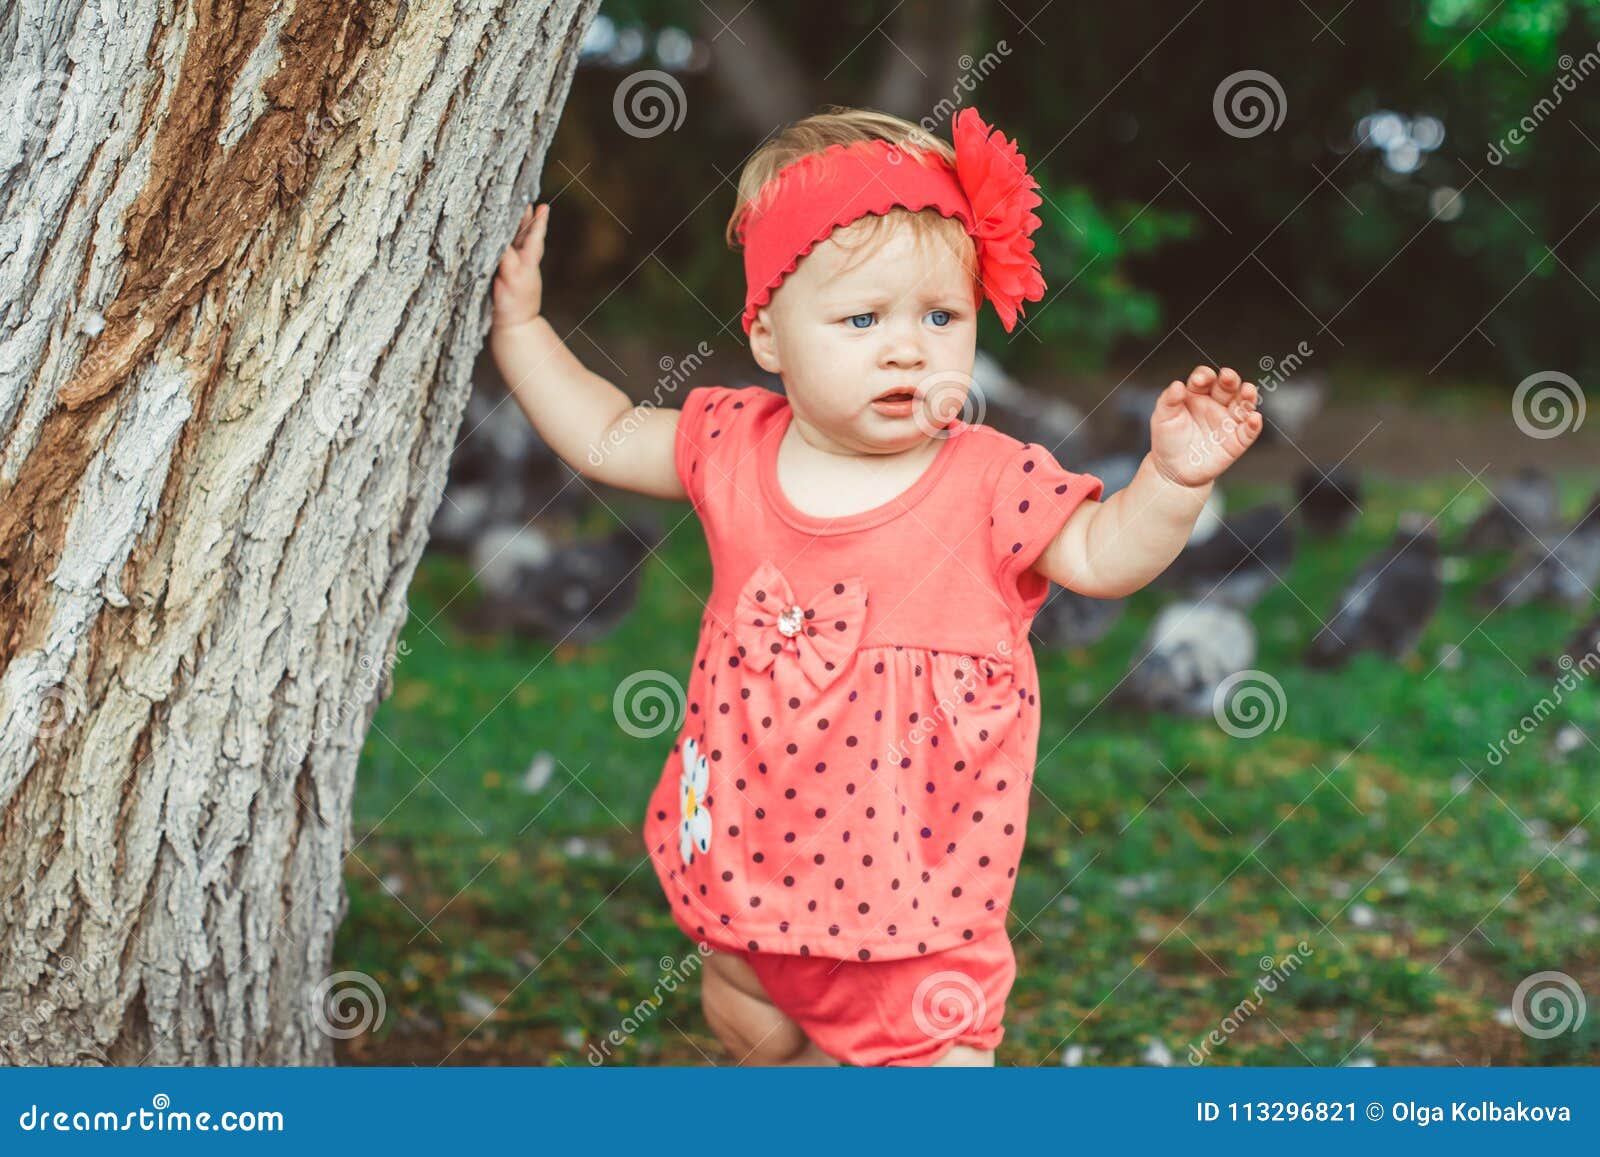 A child stands near a tree stock image. Image of life - 113296821